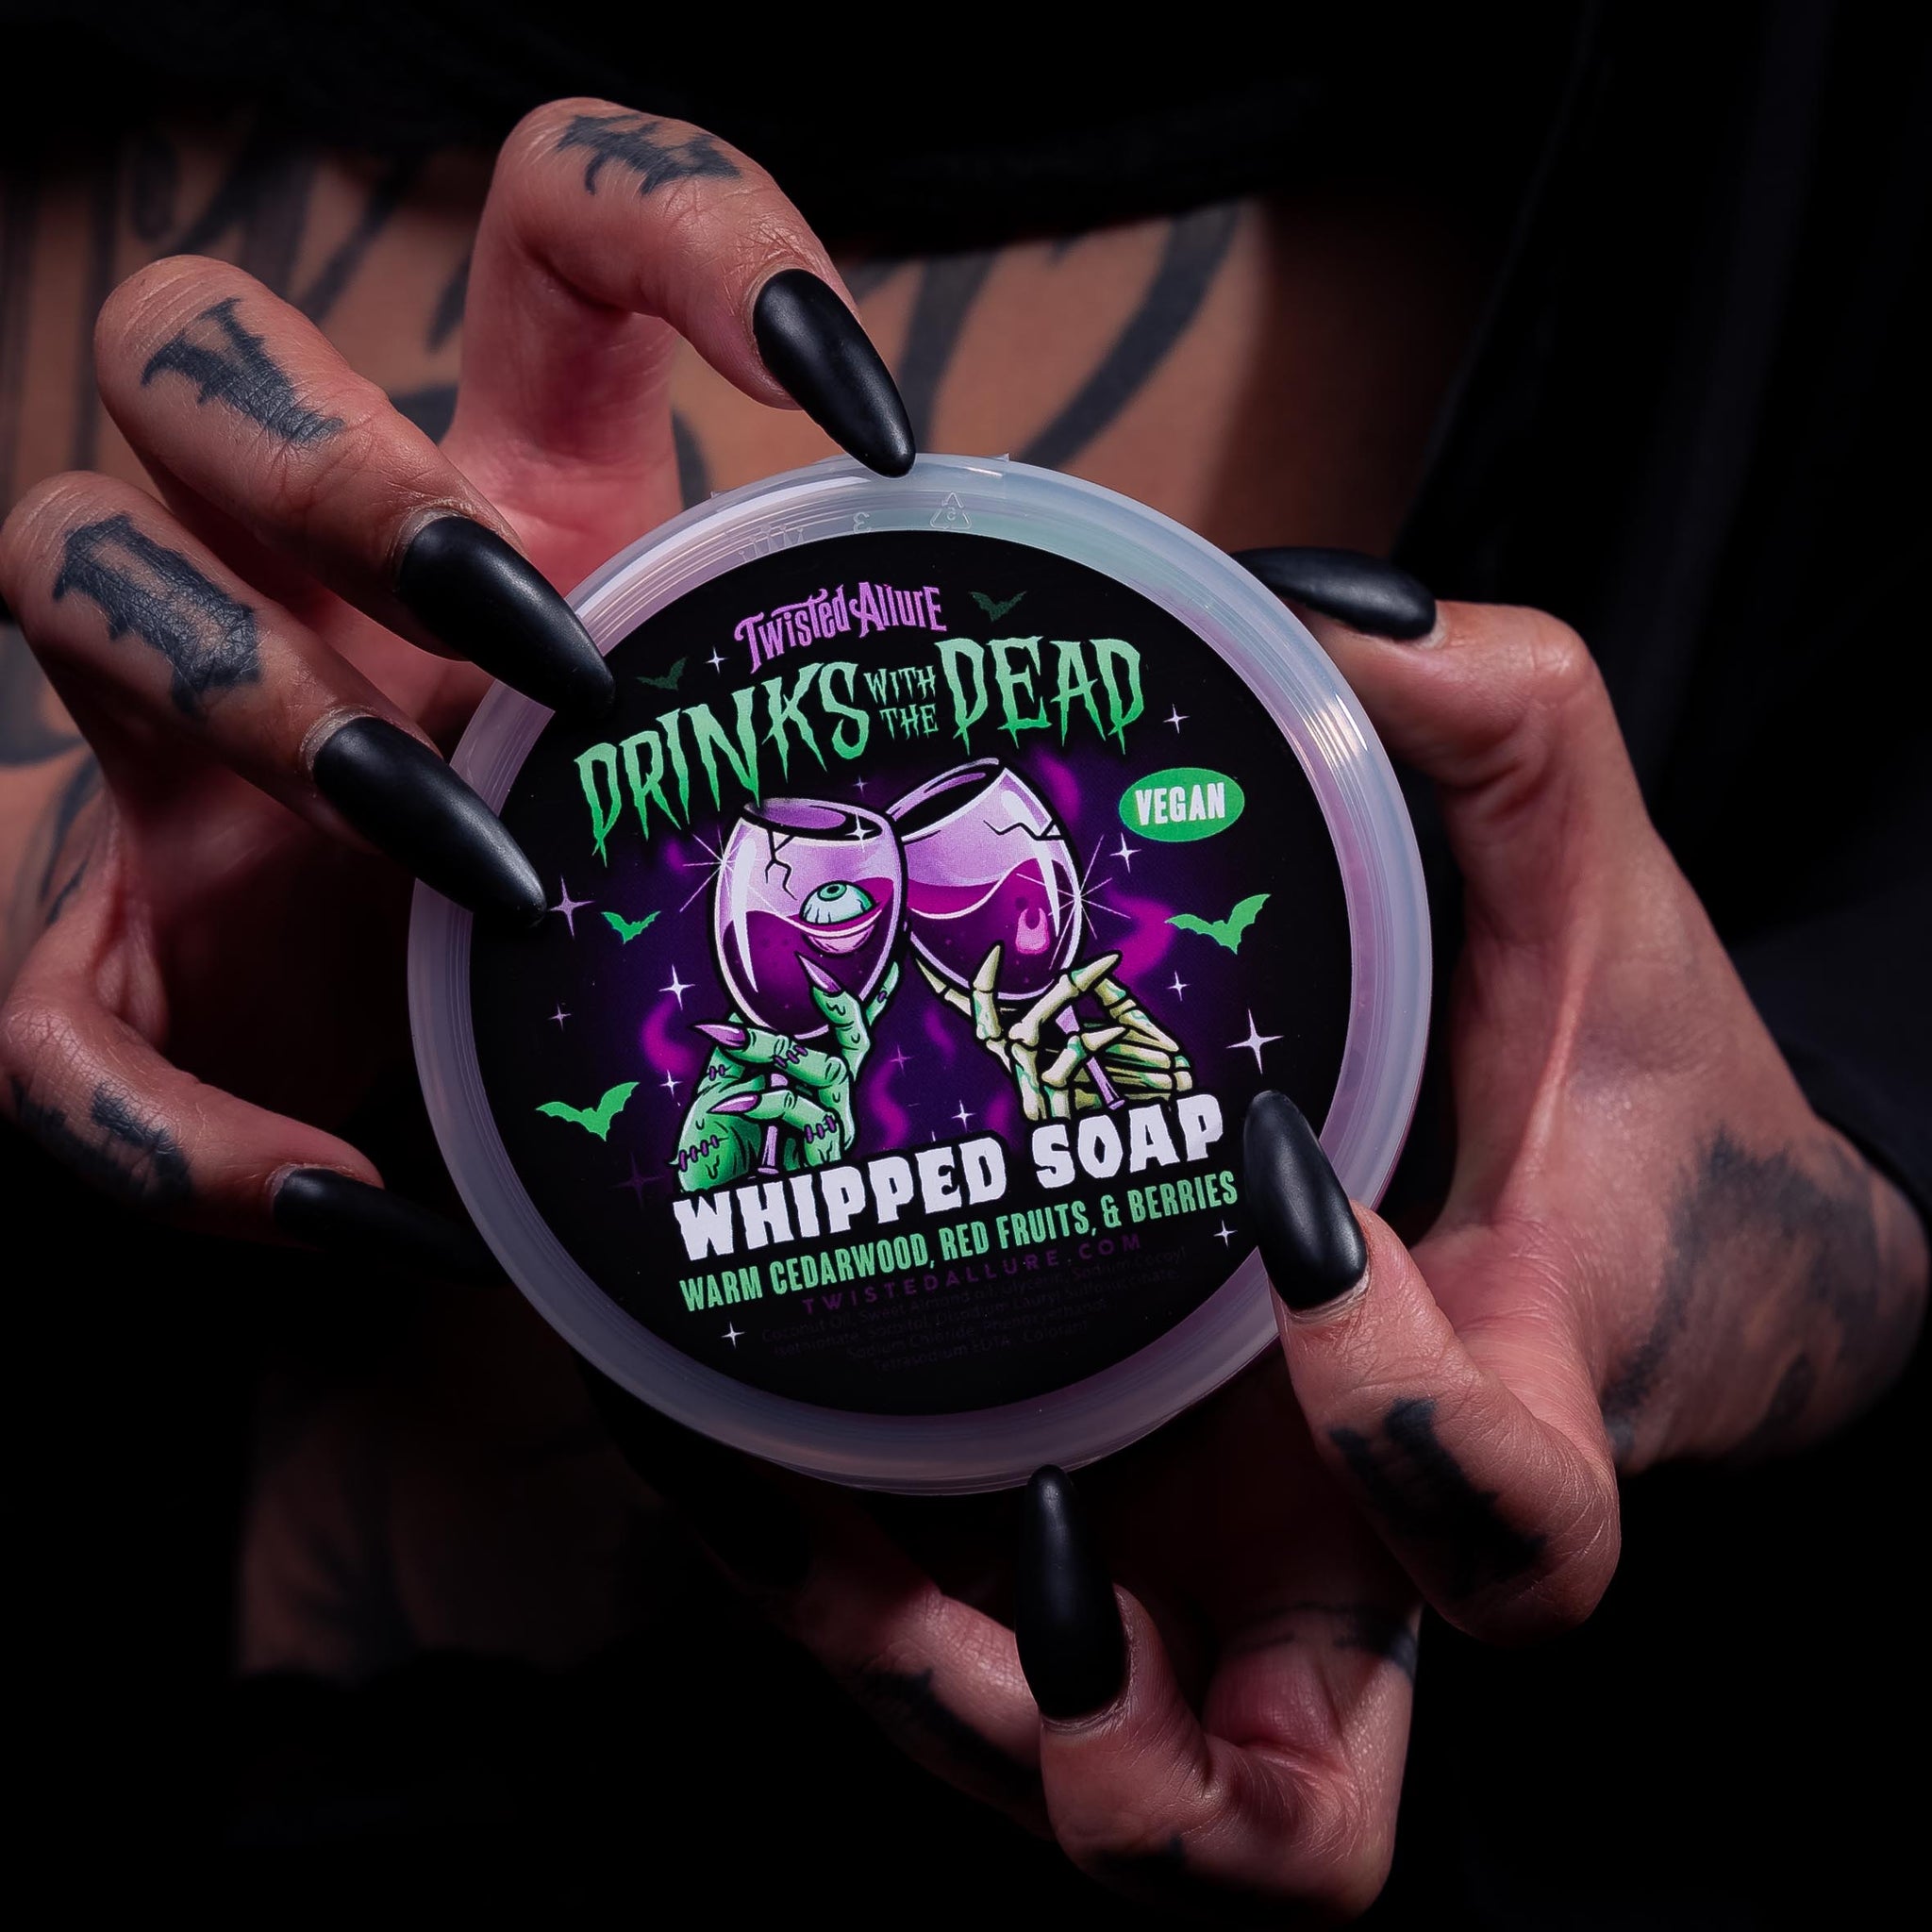 Drinks with the Dead Whipped Soap